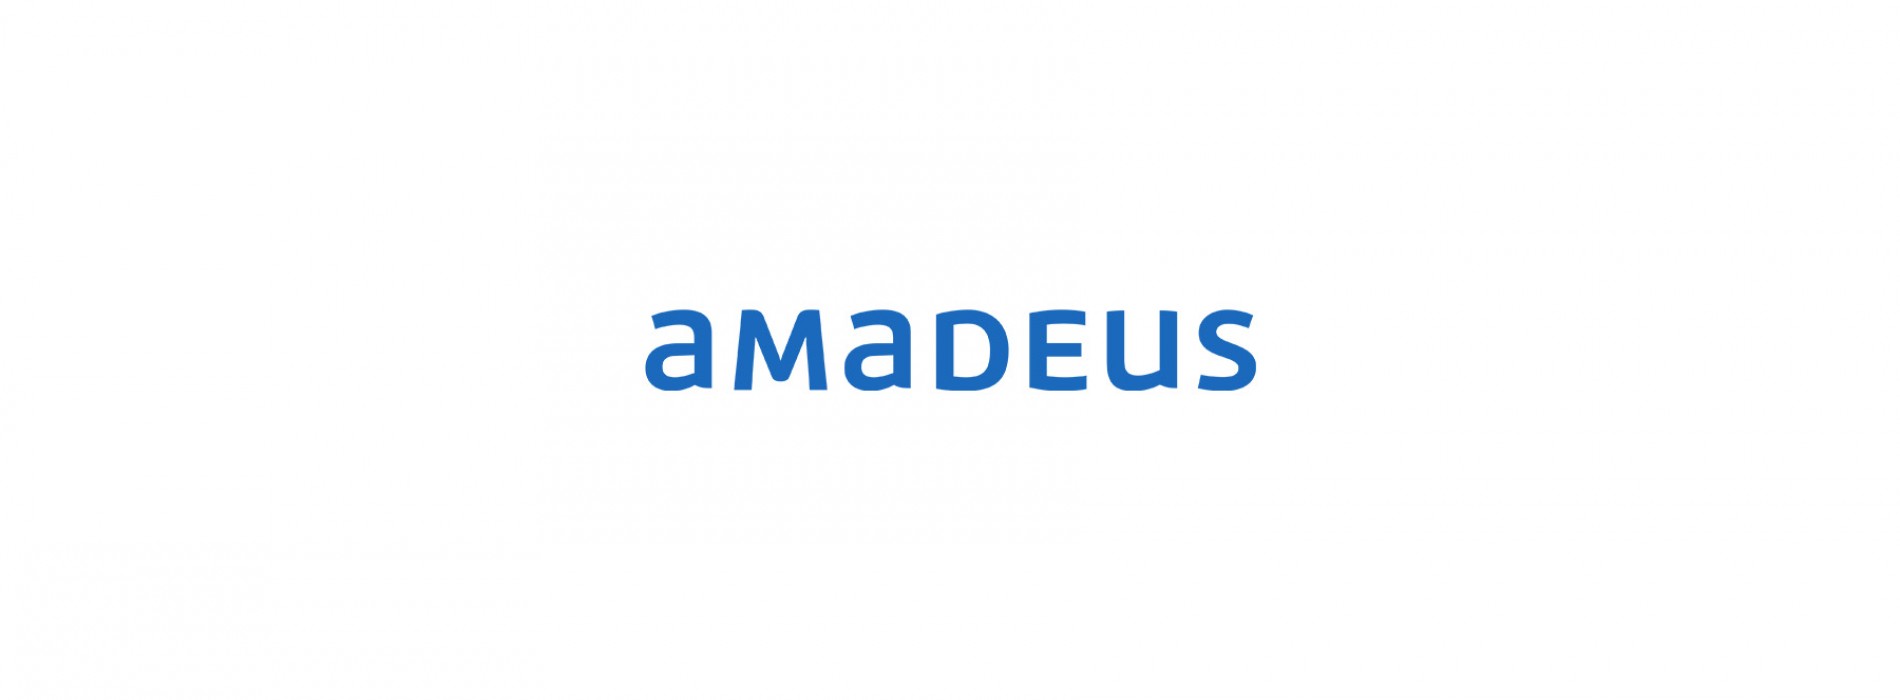 Expedia Group’s adoption of Amadeus NDC technology marks another step in driving NDC content and volumes  industry-wide